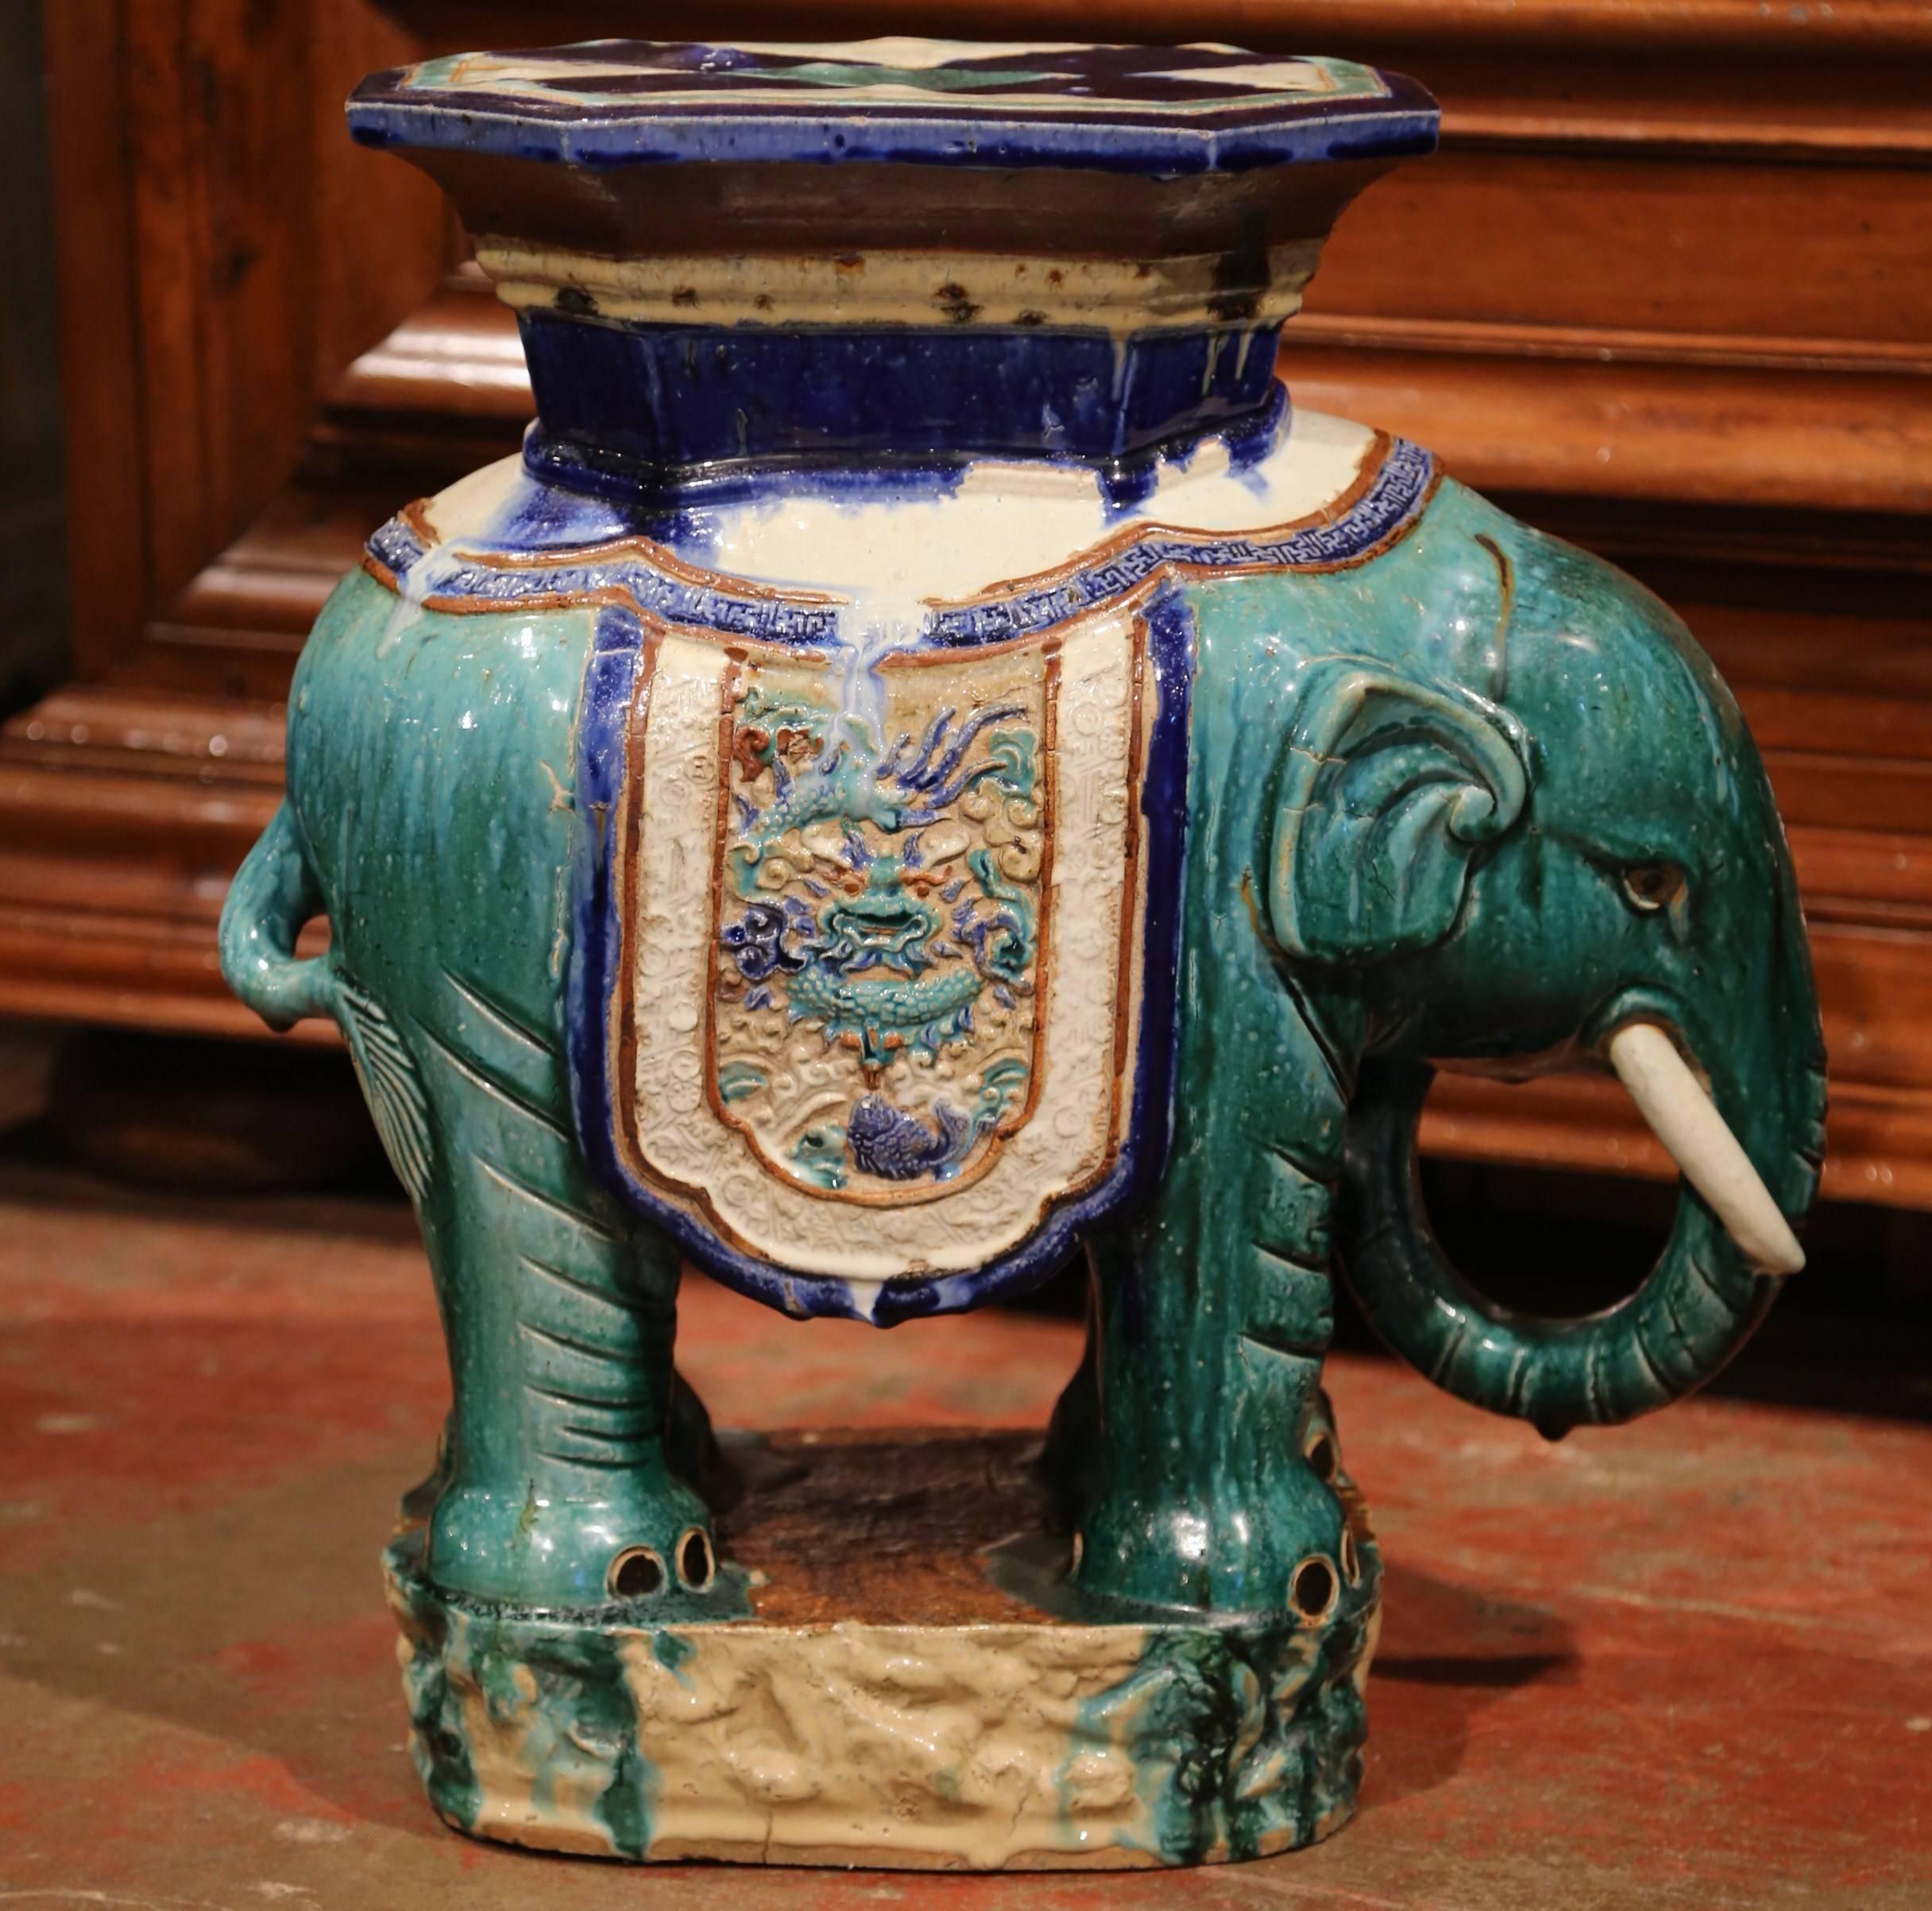 This colorful porcelain garden seat was sculpted in France, circa 1920. The shaped elephant features heavy decorated oriental finery. The mammal has a hexagonal seat at the top and is hand painted in the green, blue and beige palette. This unique